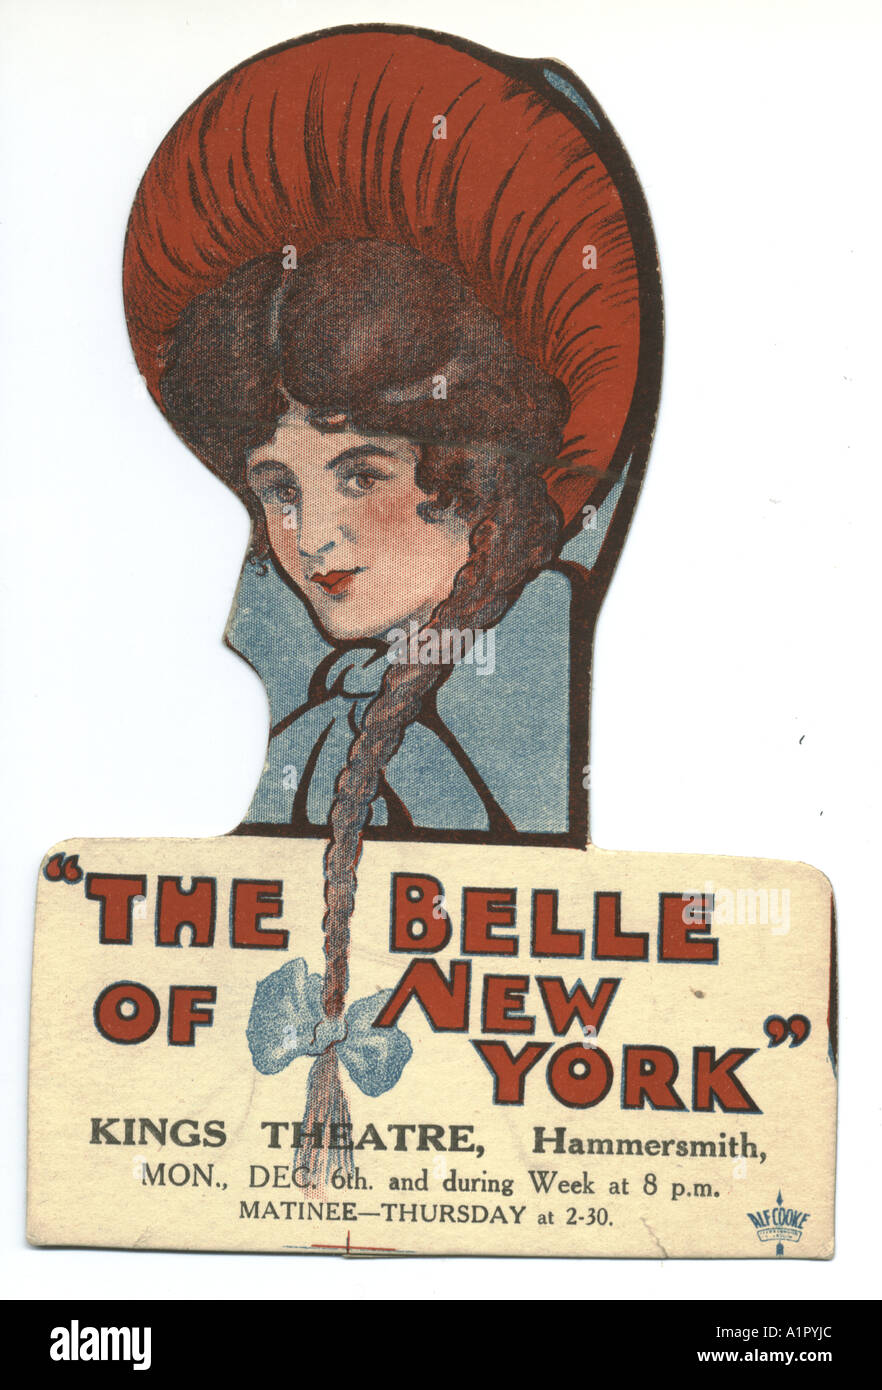 The Belle of New York die cut theatre advertisement circa 1915 Stock Photo